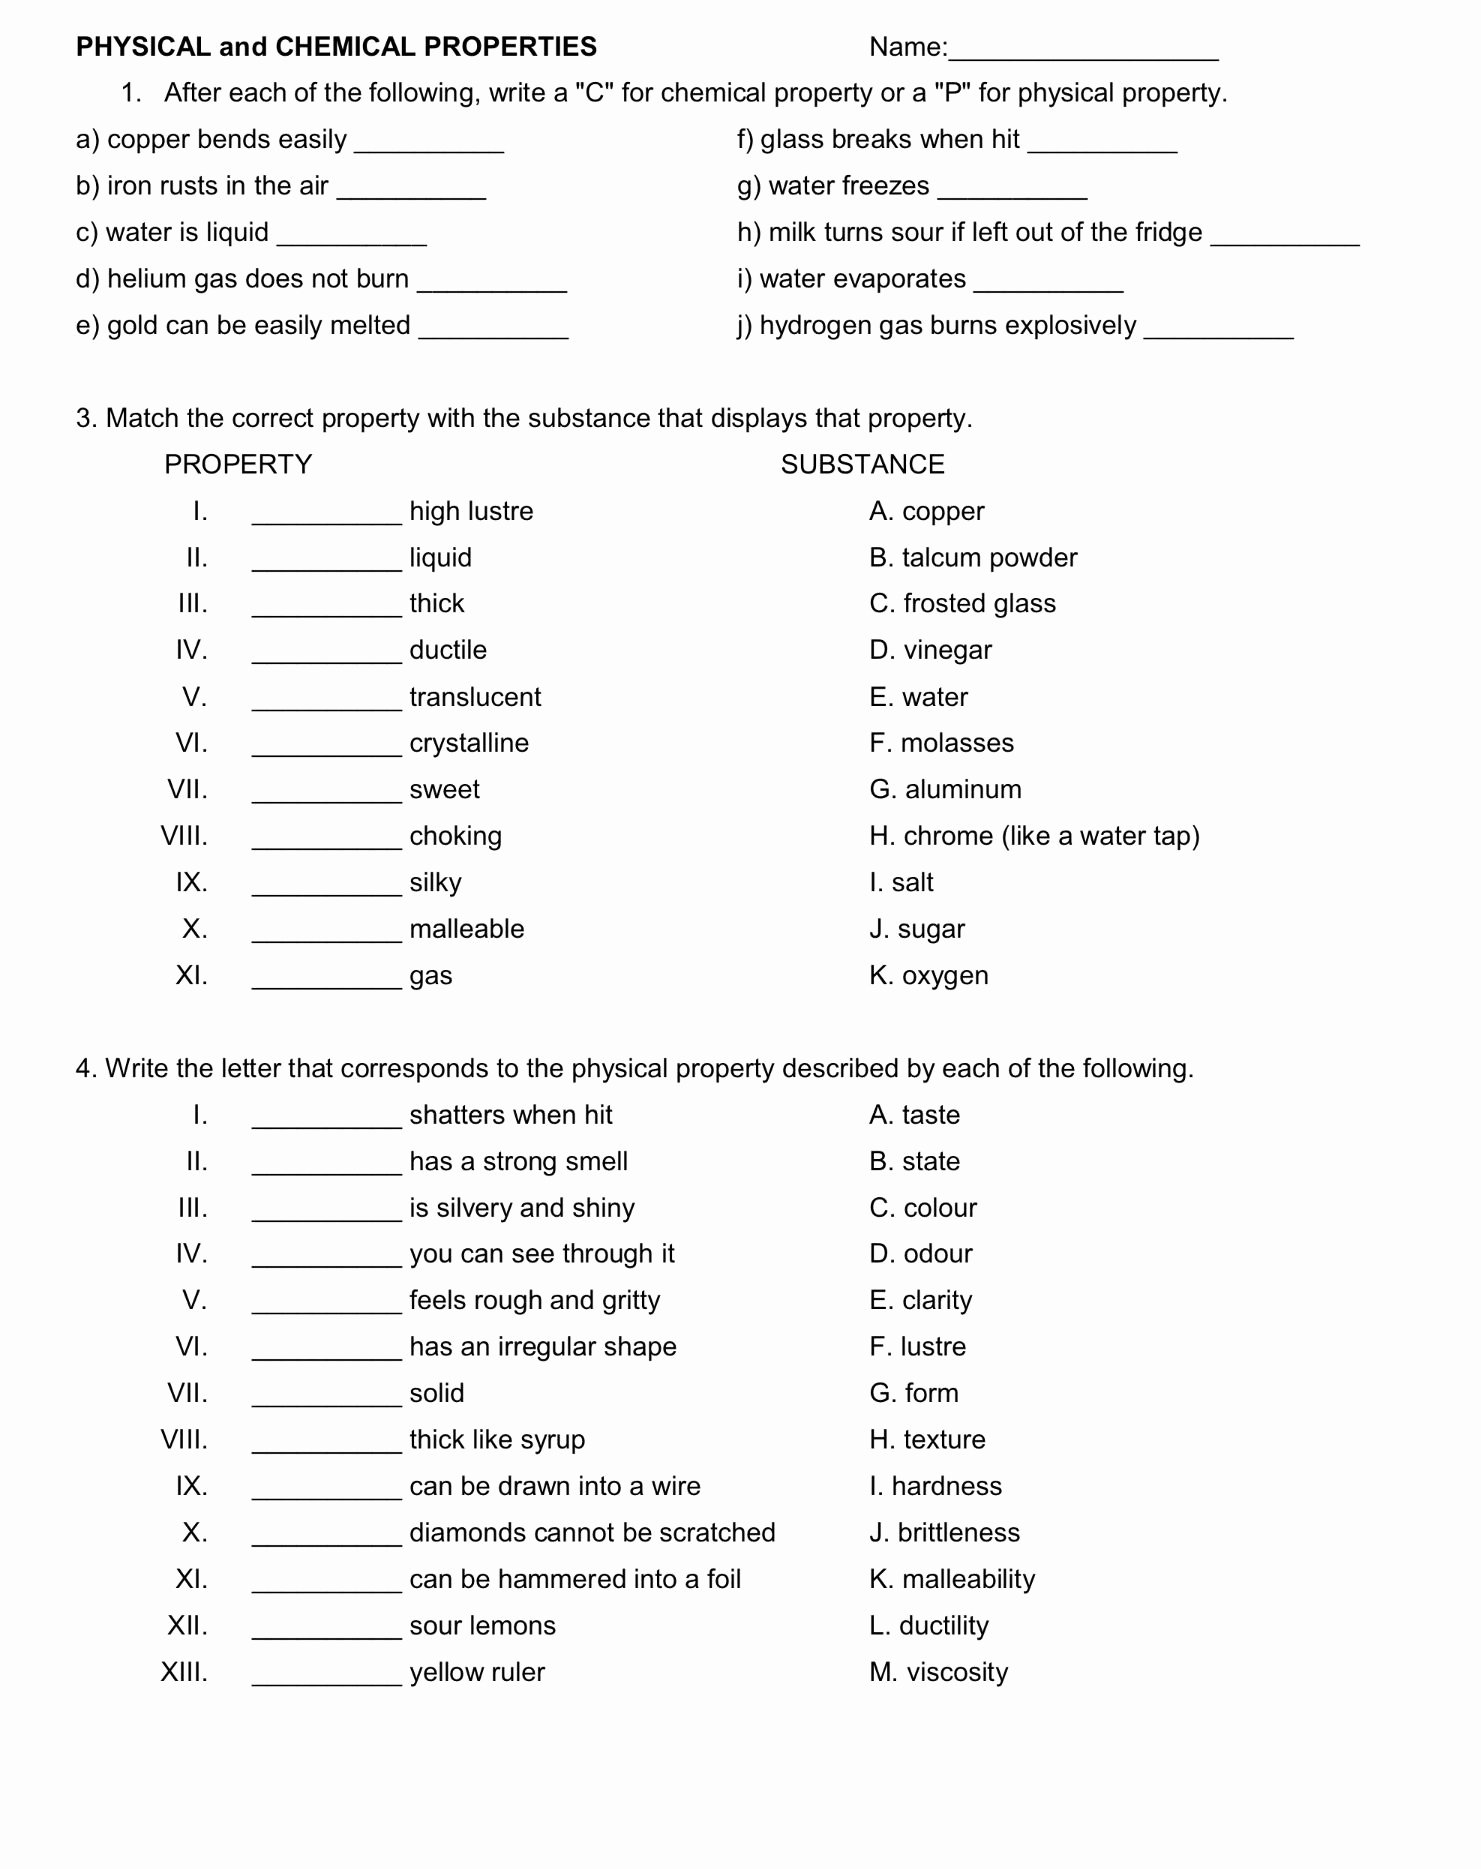 Physical Vs Chemical Properties Worksheet Inspirational Physical and Chemical Properties Worksheet Monday